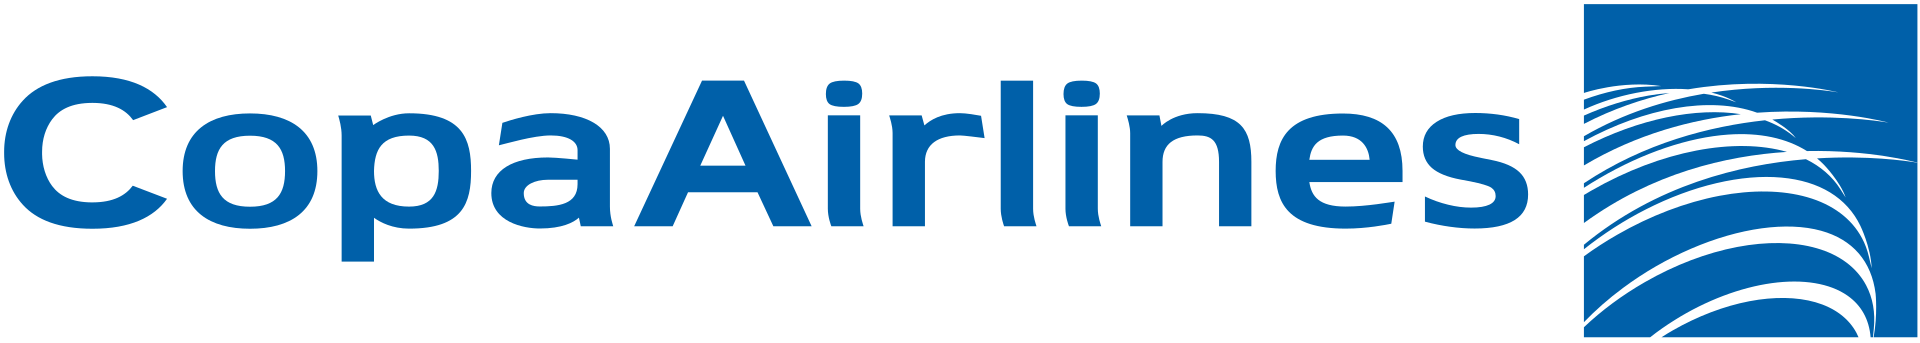 COPA Airlines logo